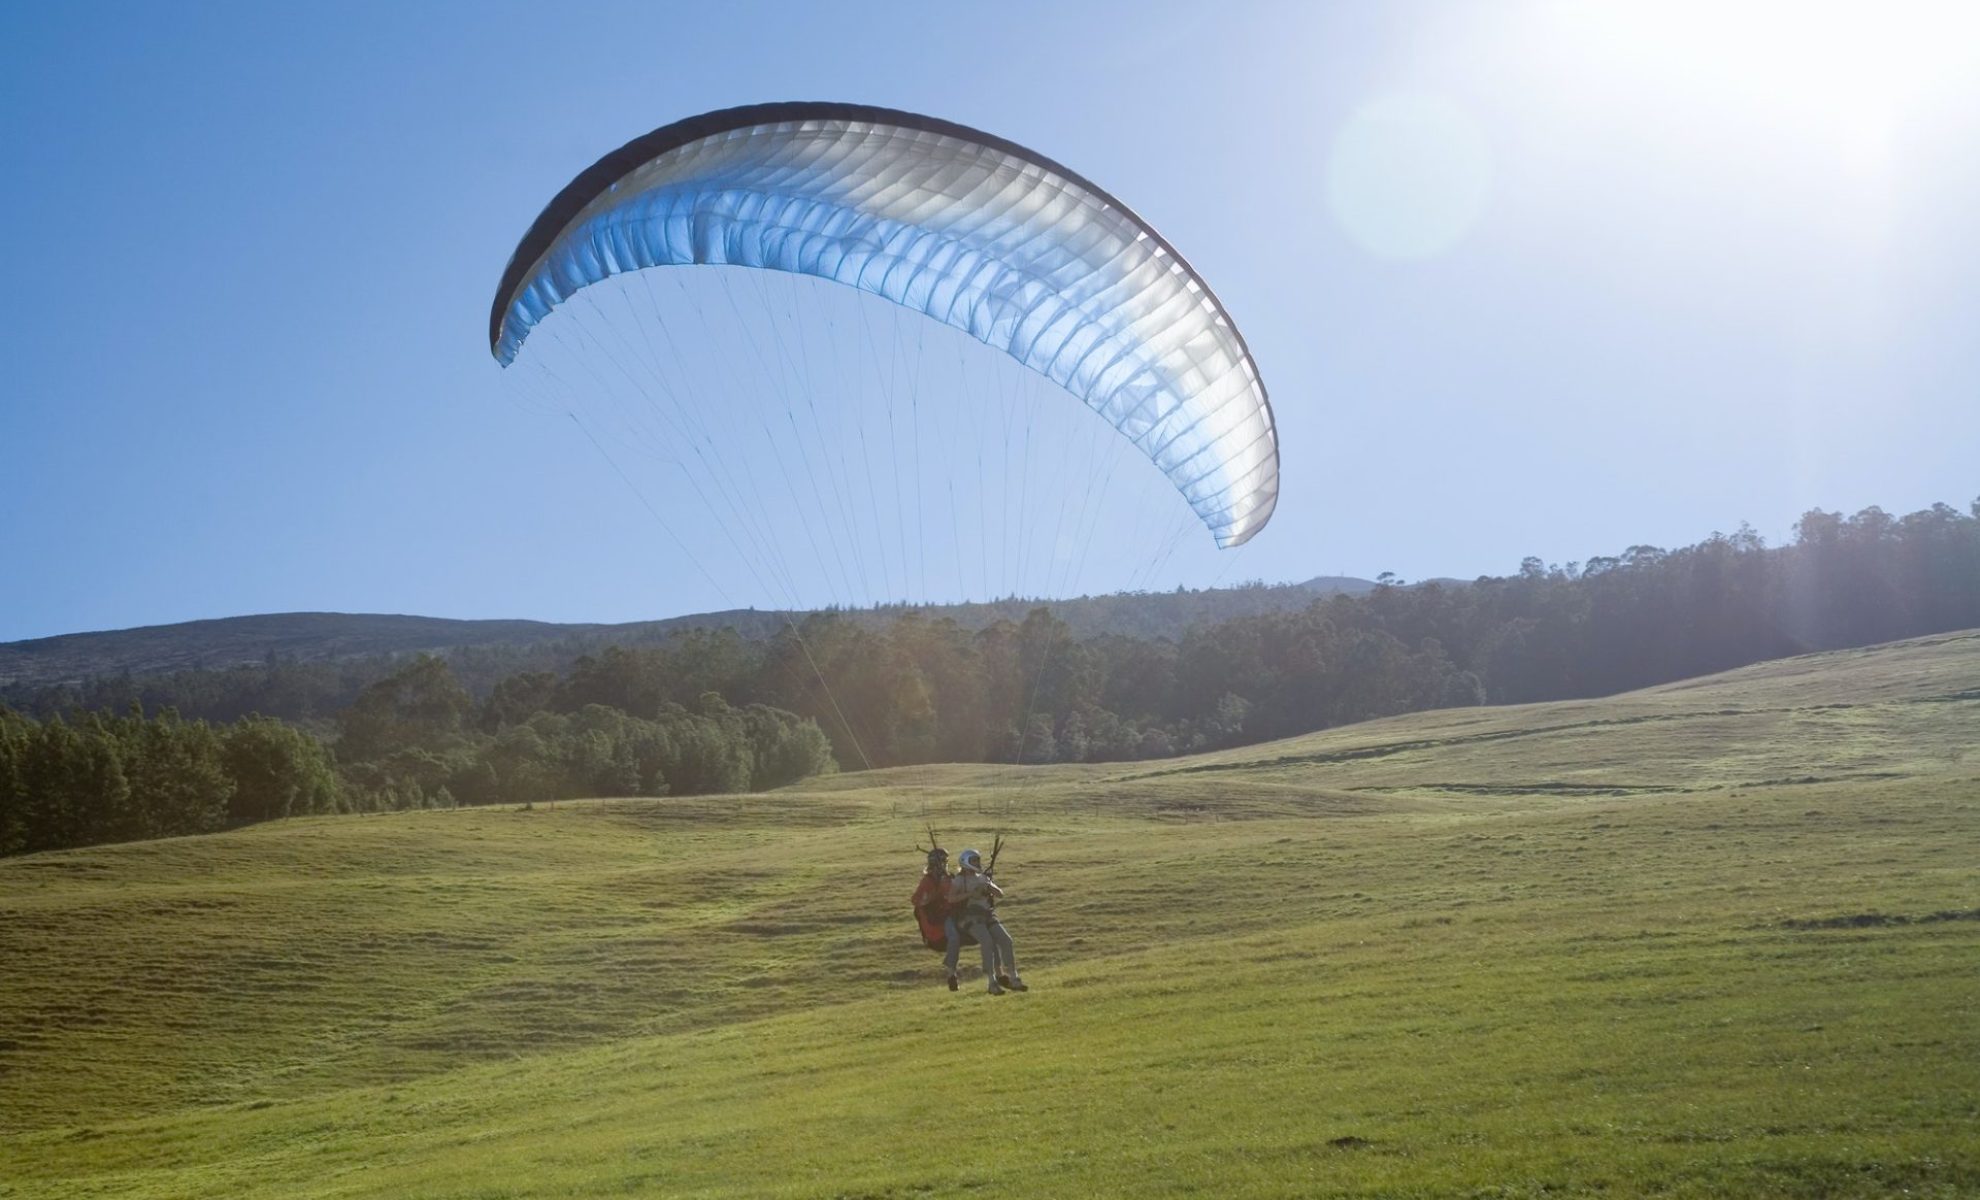 Paragliding is a must try in Udaipur